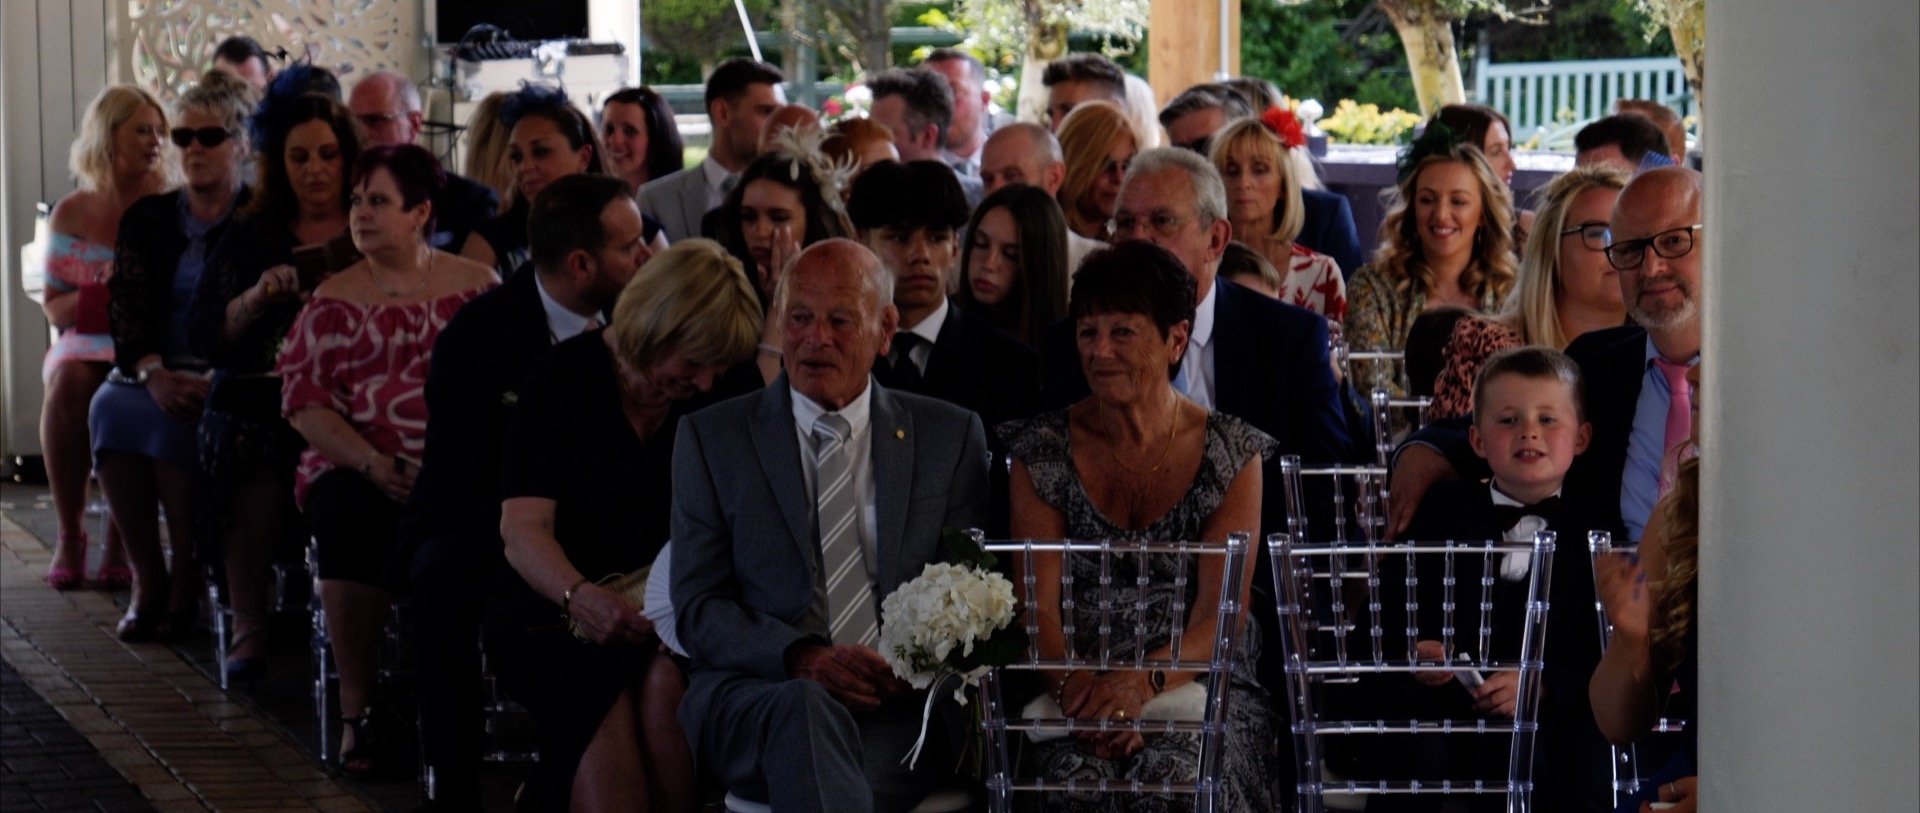 Wedding guests waiting for the ceremony.jpg